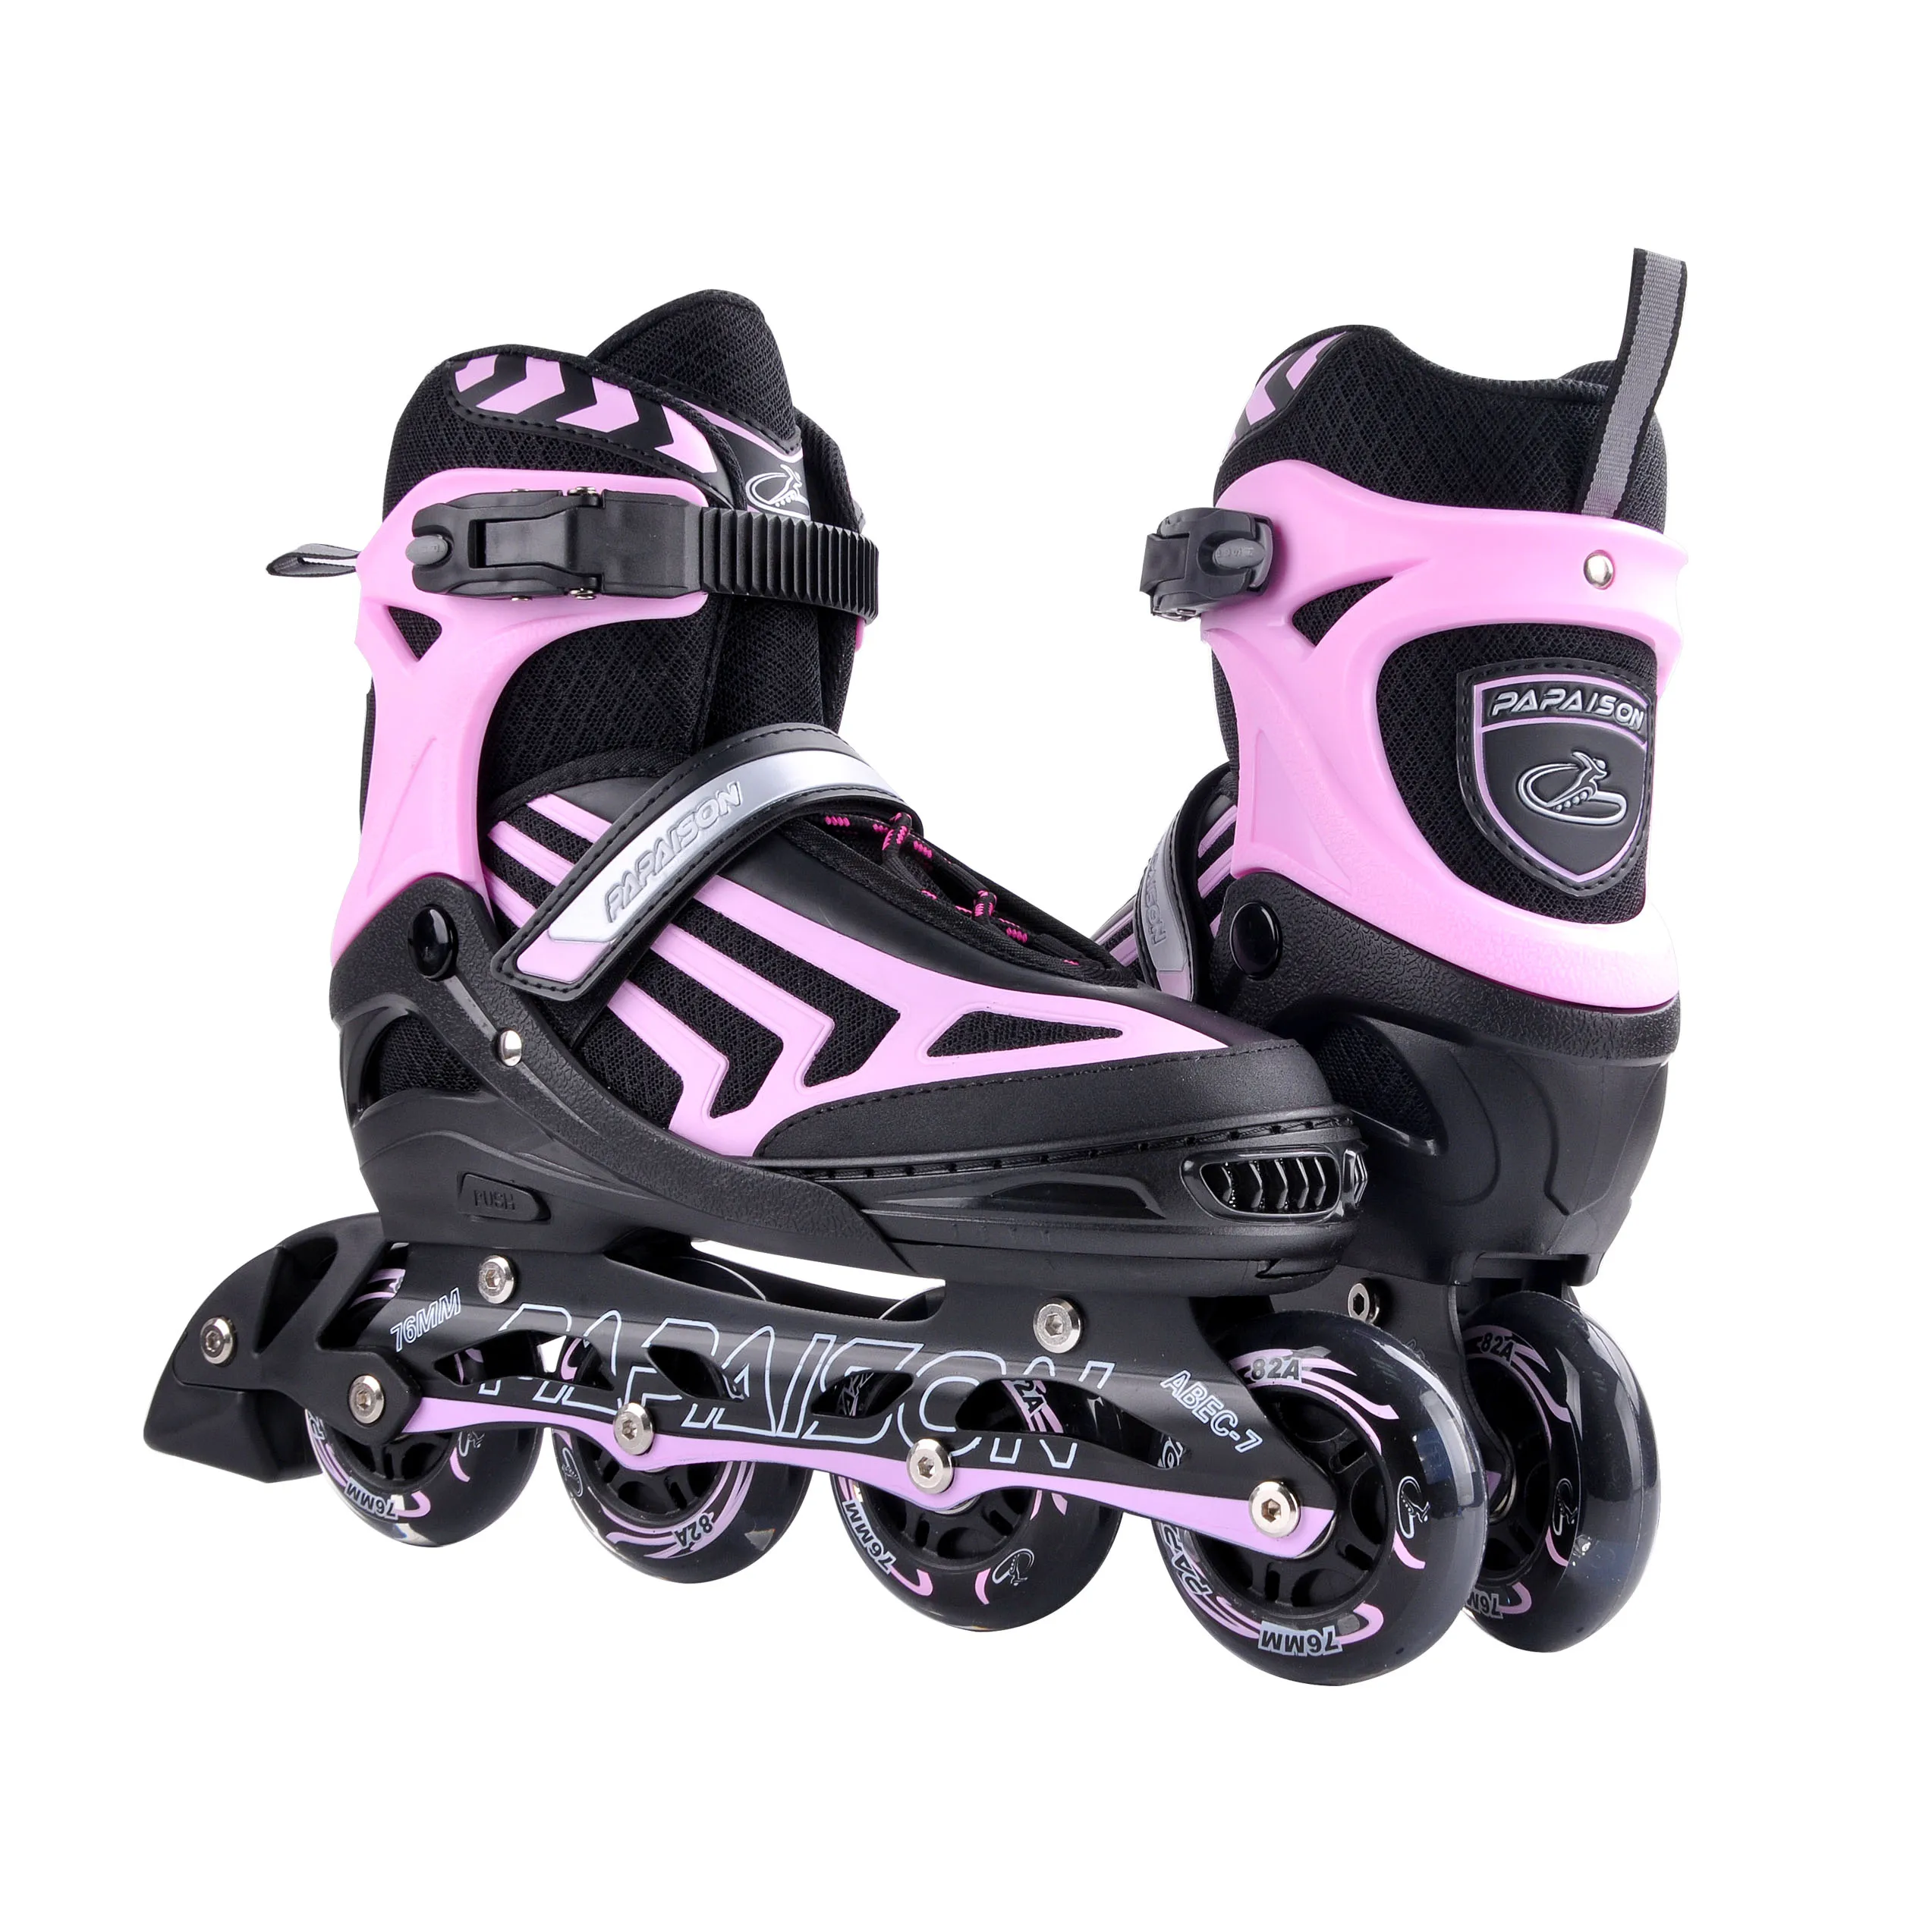 Huisje Vijf Staan voor Flashing Wheels Roller Light-up Cheap Price Good Quality Rubber Wheels In  Stock Inline Skates - Buy Cheap Roller Skates,Inline Skates,Skate Roller  Shoes Product on Alibaba.com